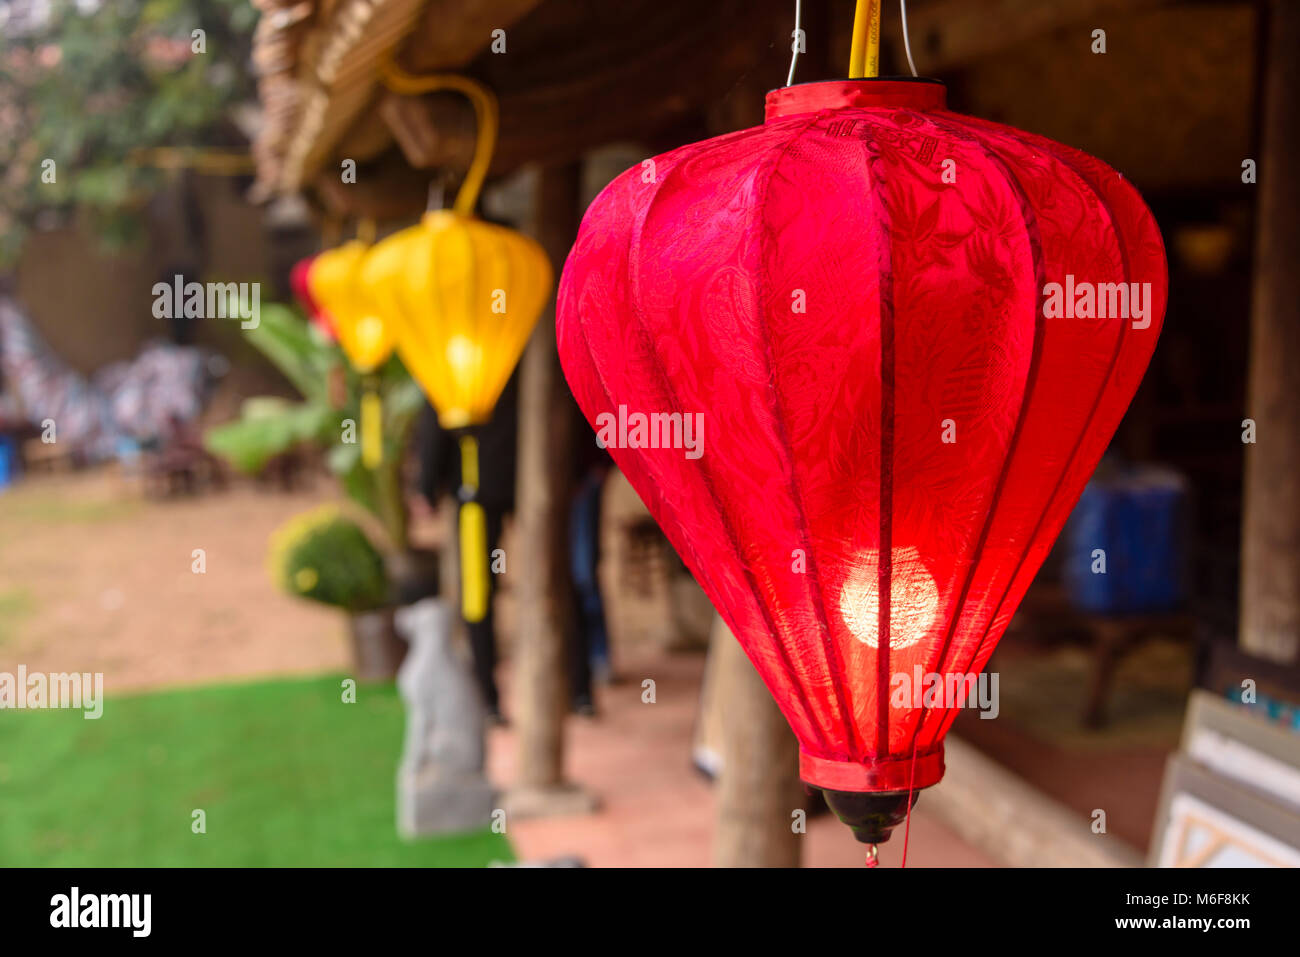 Chinese lanterns outside a traditional wooden building in Hanoi, Vietnam, to celebrate the Chinese New Year. Stock Photo